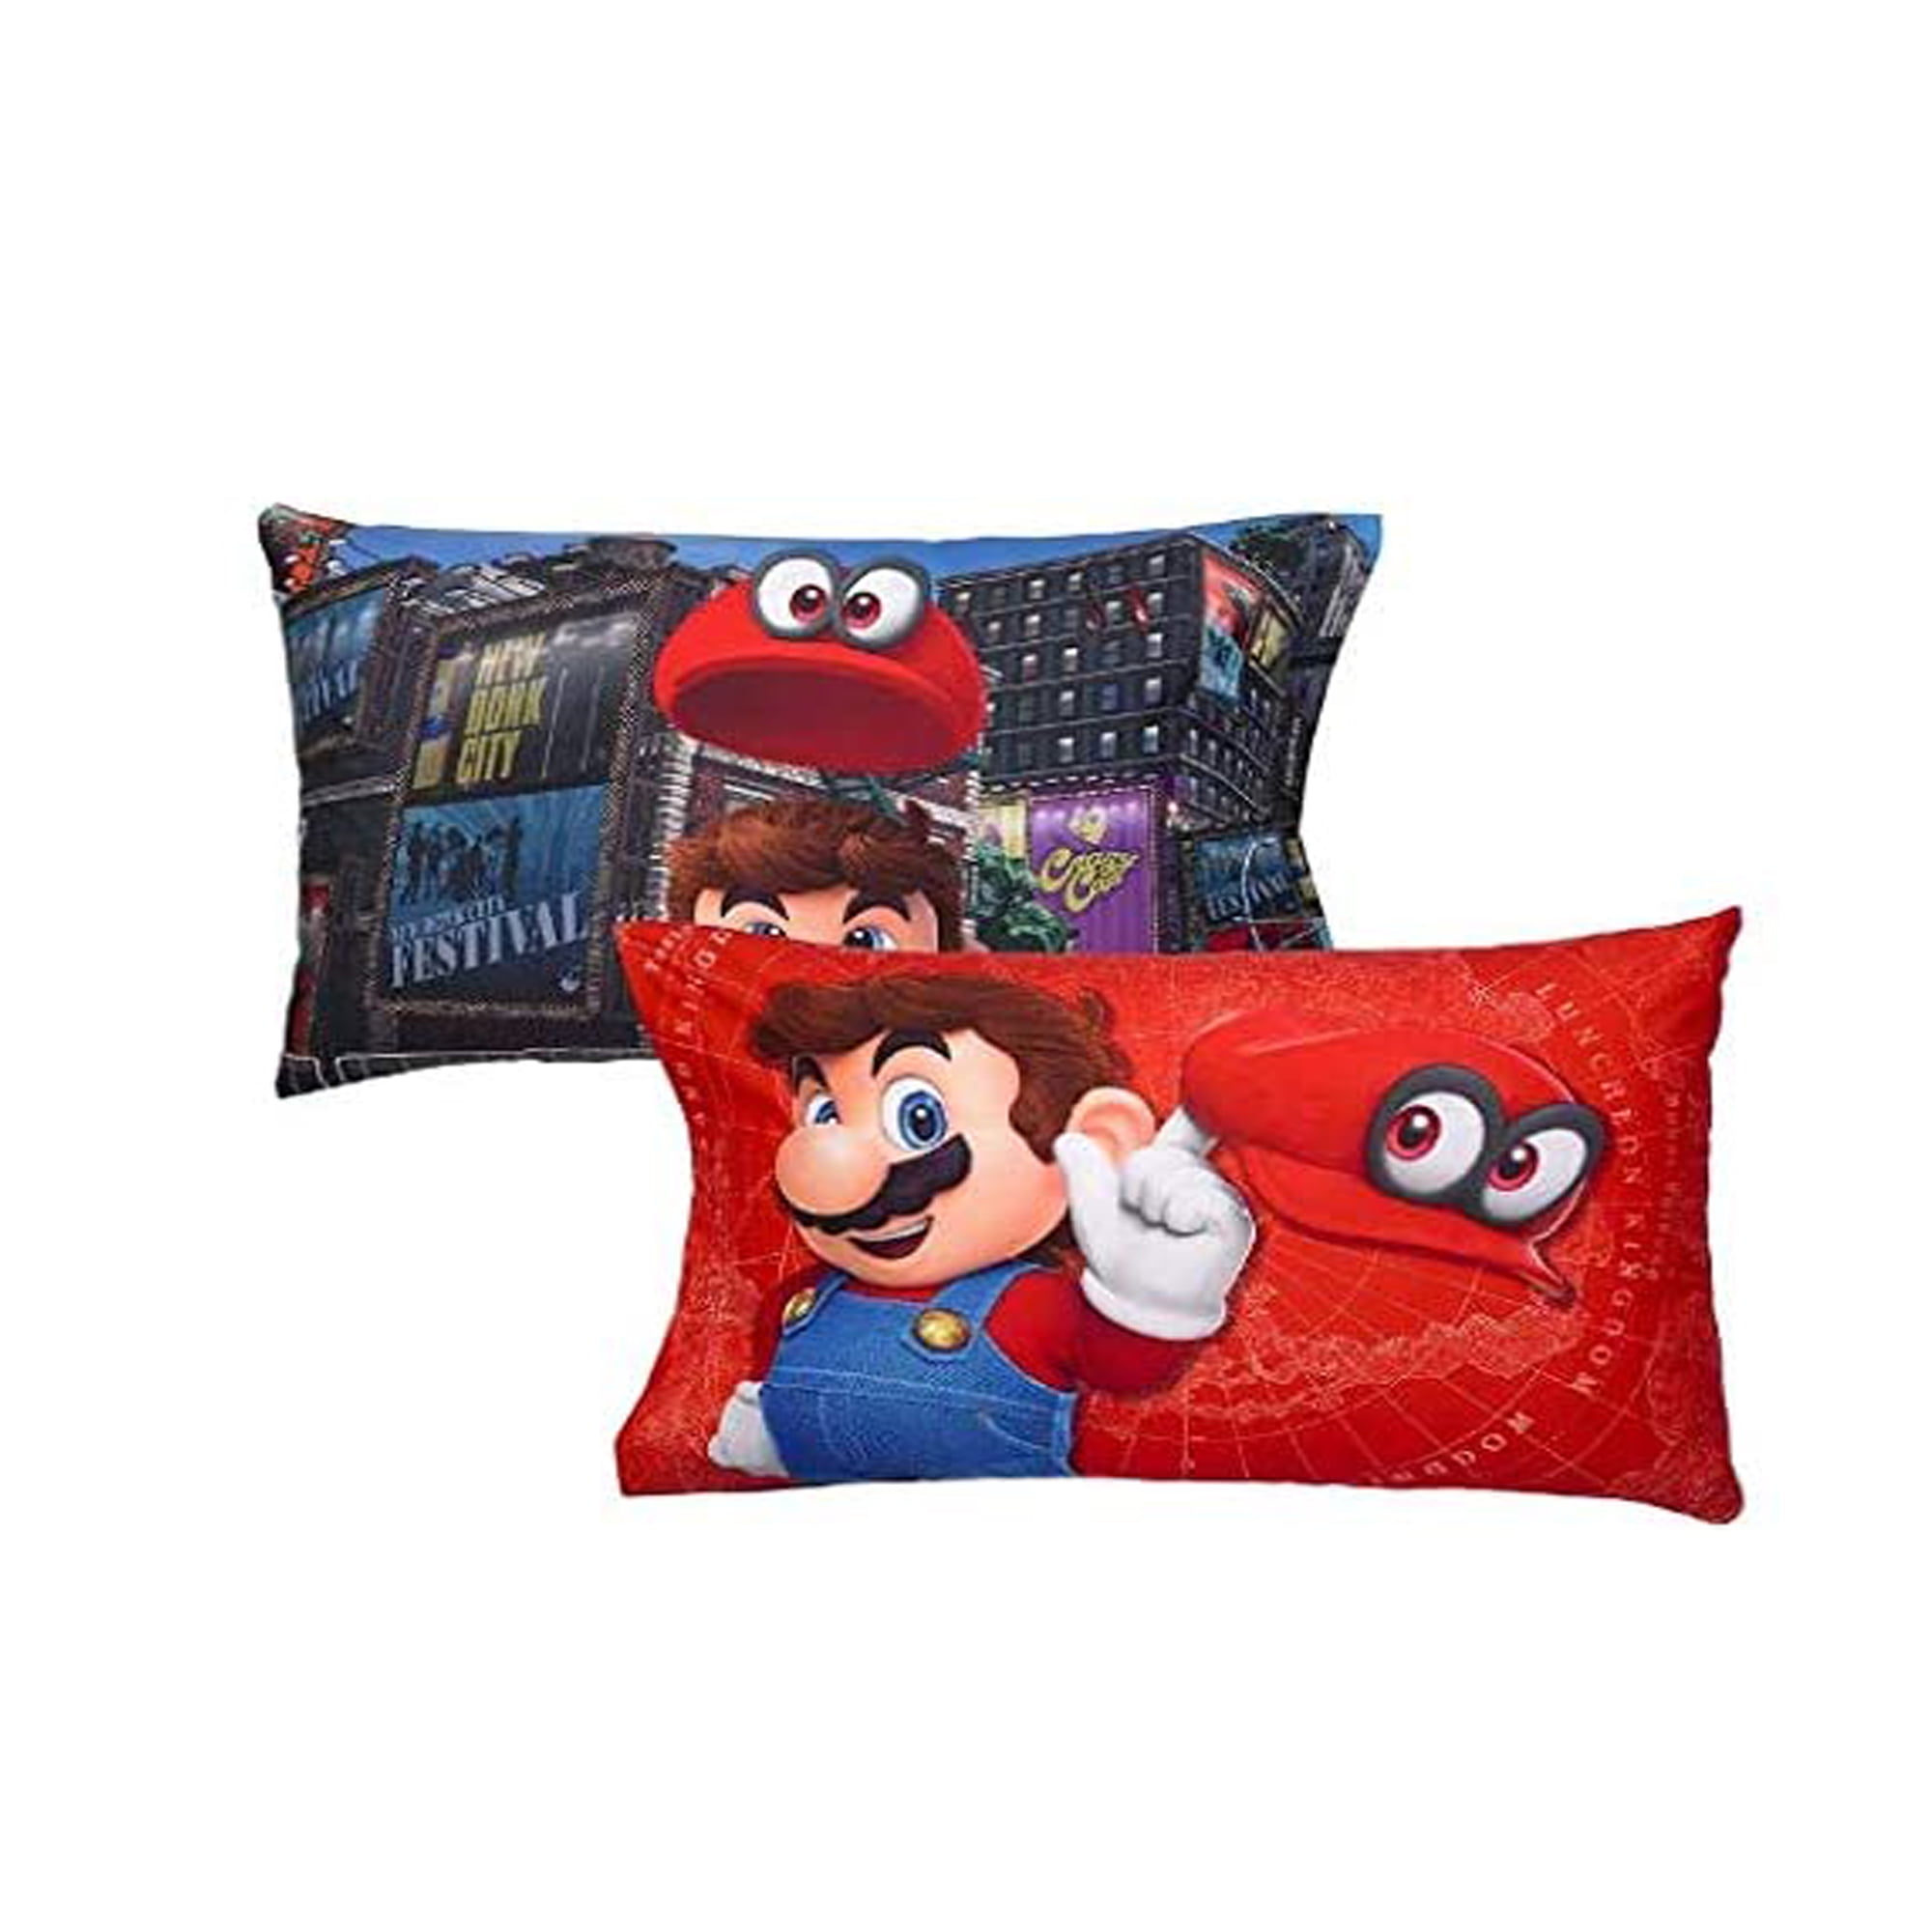 Baby Room Kids Bedroom Childrens Pillow Case personalized pillow case Toddler Room Super Mario Brothers pillow case birthday gift boys bedroom 